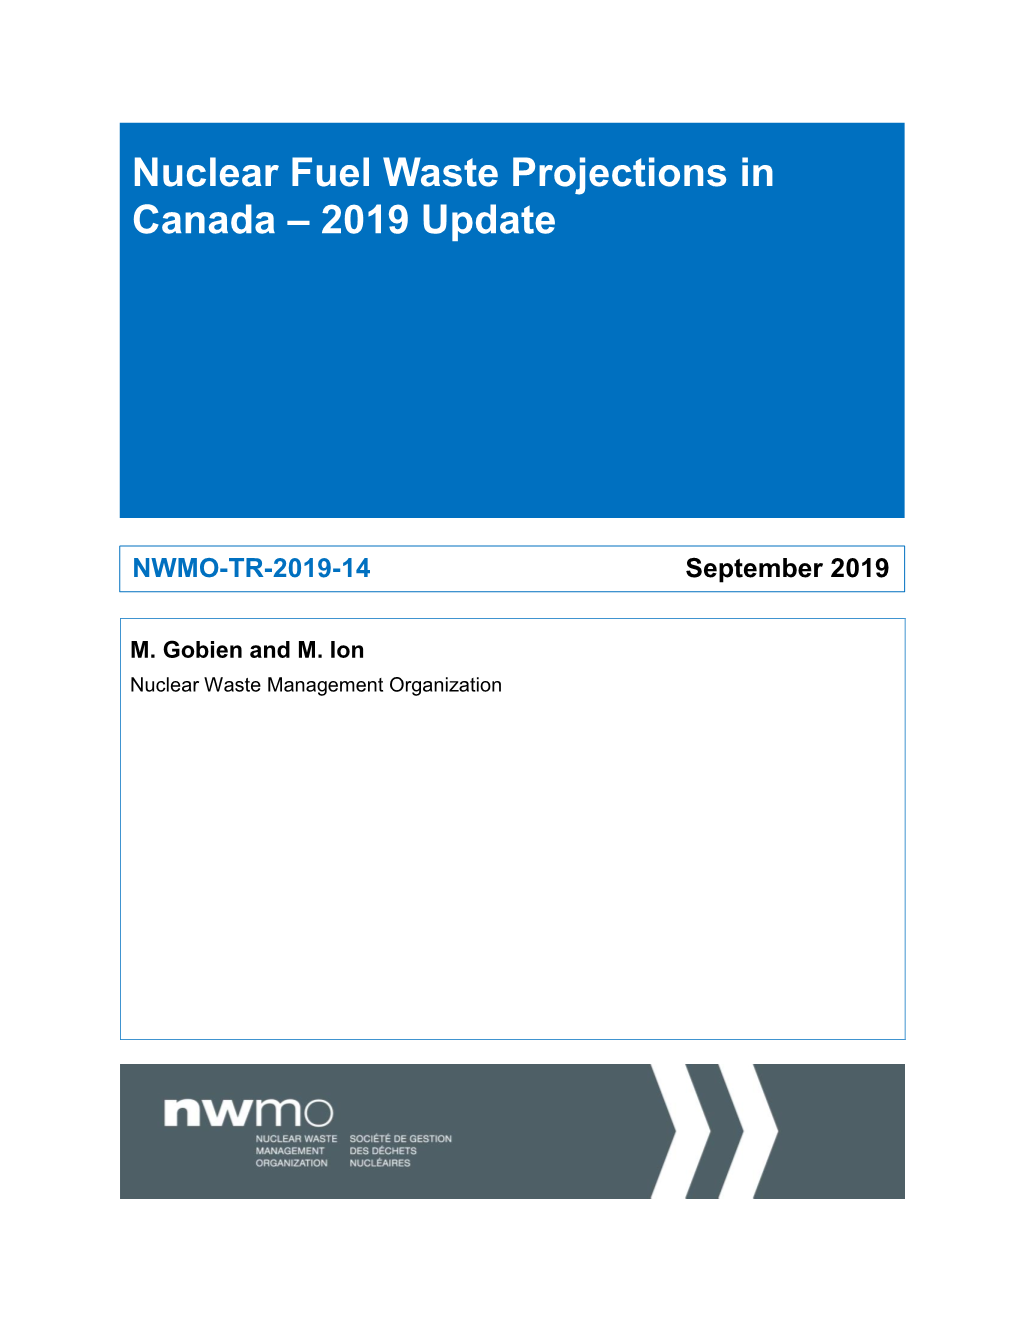 Nuclear Fuel Waste Projections in Canada – 2019 Update